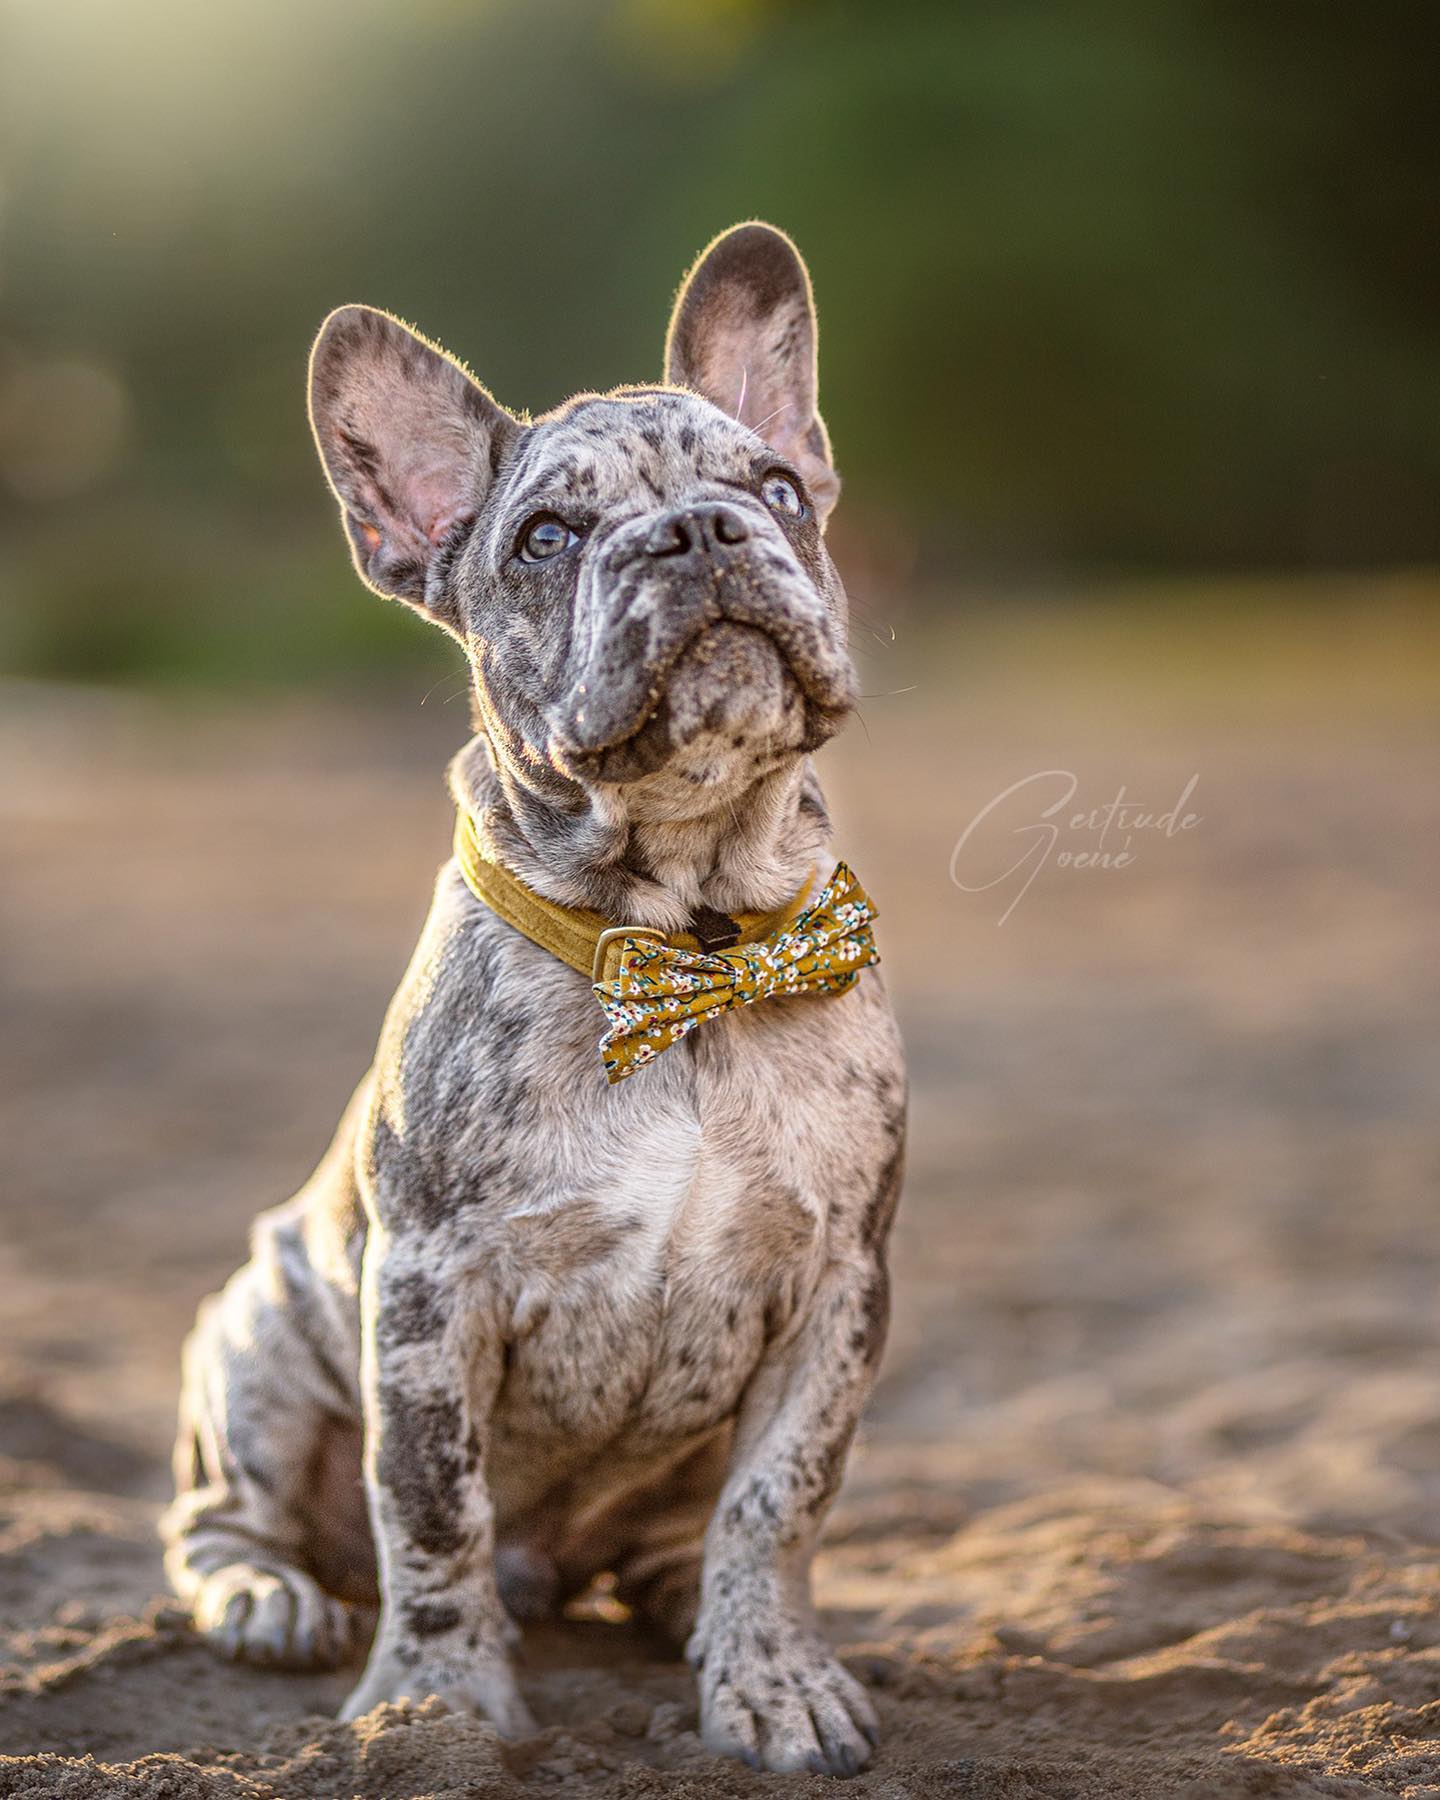 HAPPY SUNDAY! ✨Cute @excuse.my.frenchie.gizmo is wearing our Velvet Ocher collar and Wildflowers bow. 💛📸 @gertrudegoenephotography✽ ✽HAPPY SUNDAY ✨Handsome @excuse.my.frenchie.gizmo wears our Velvet Ocher collar and Wildflowers bow tie. 💛